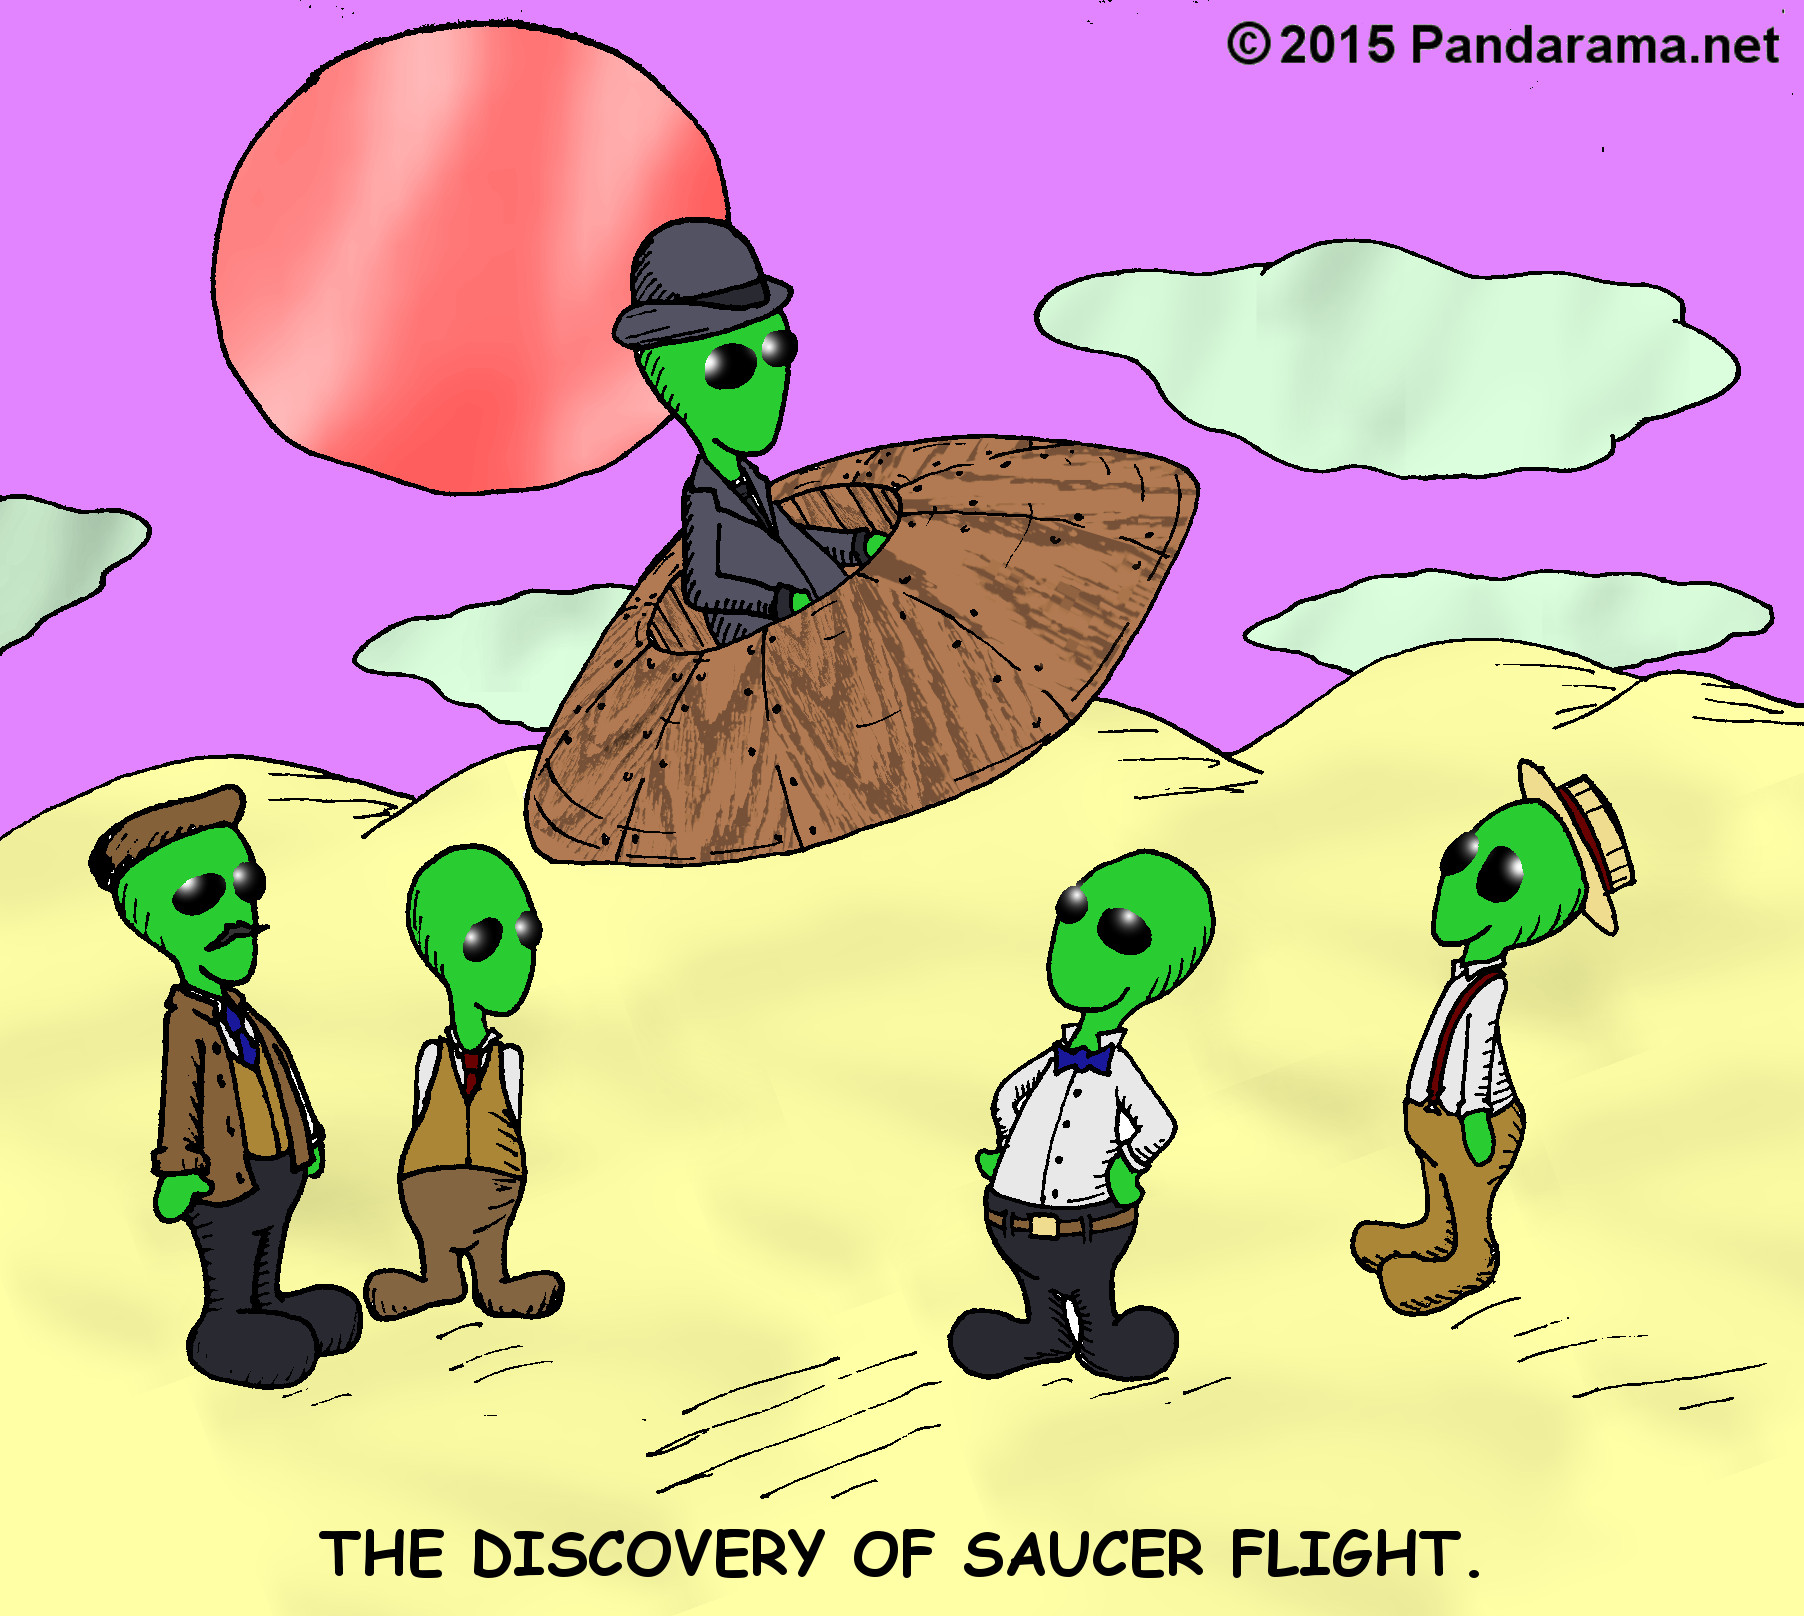 Aliens discover flight in wooden flying saucer.